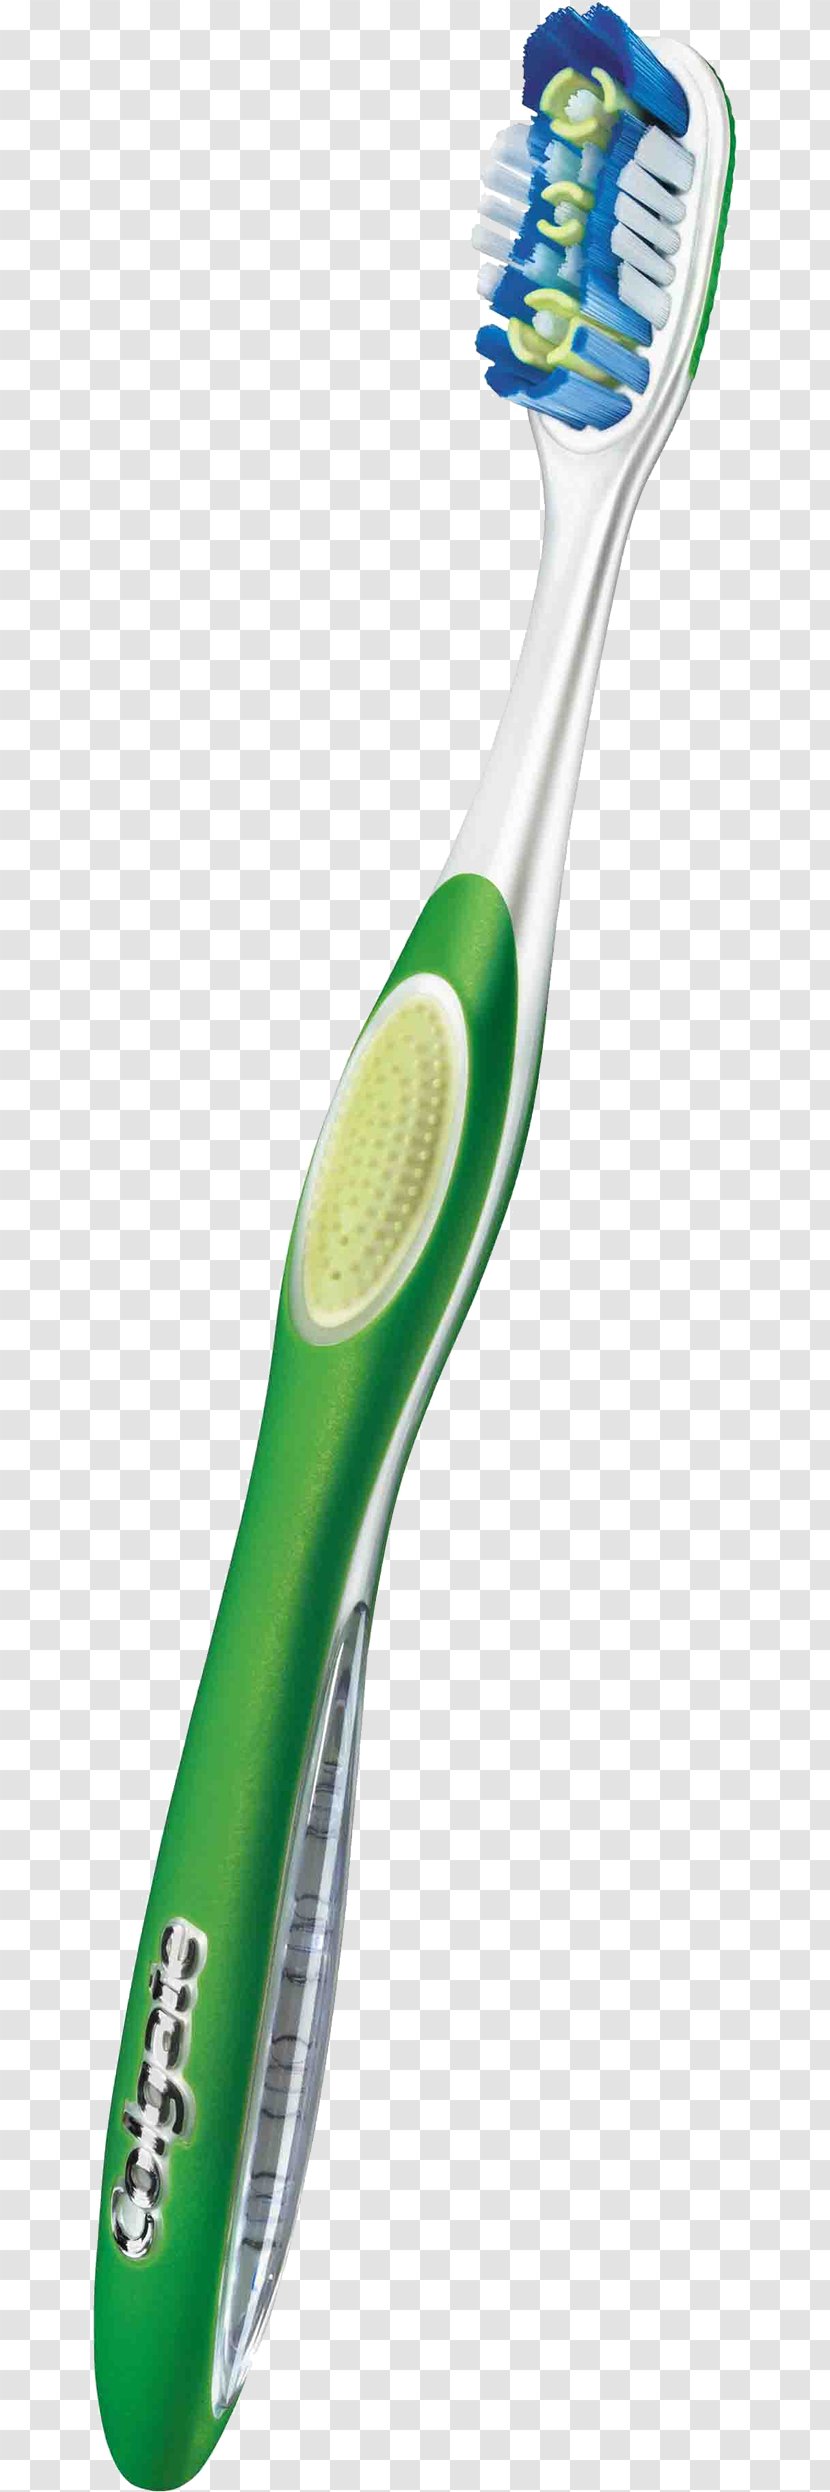 Toothbrush Colgate PhotoScape - Toothpaste - Toothbrash Image Transparent PNG